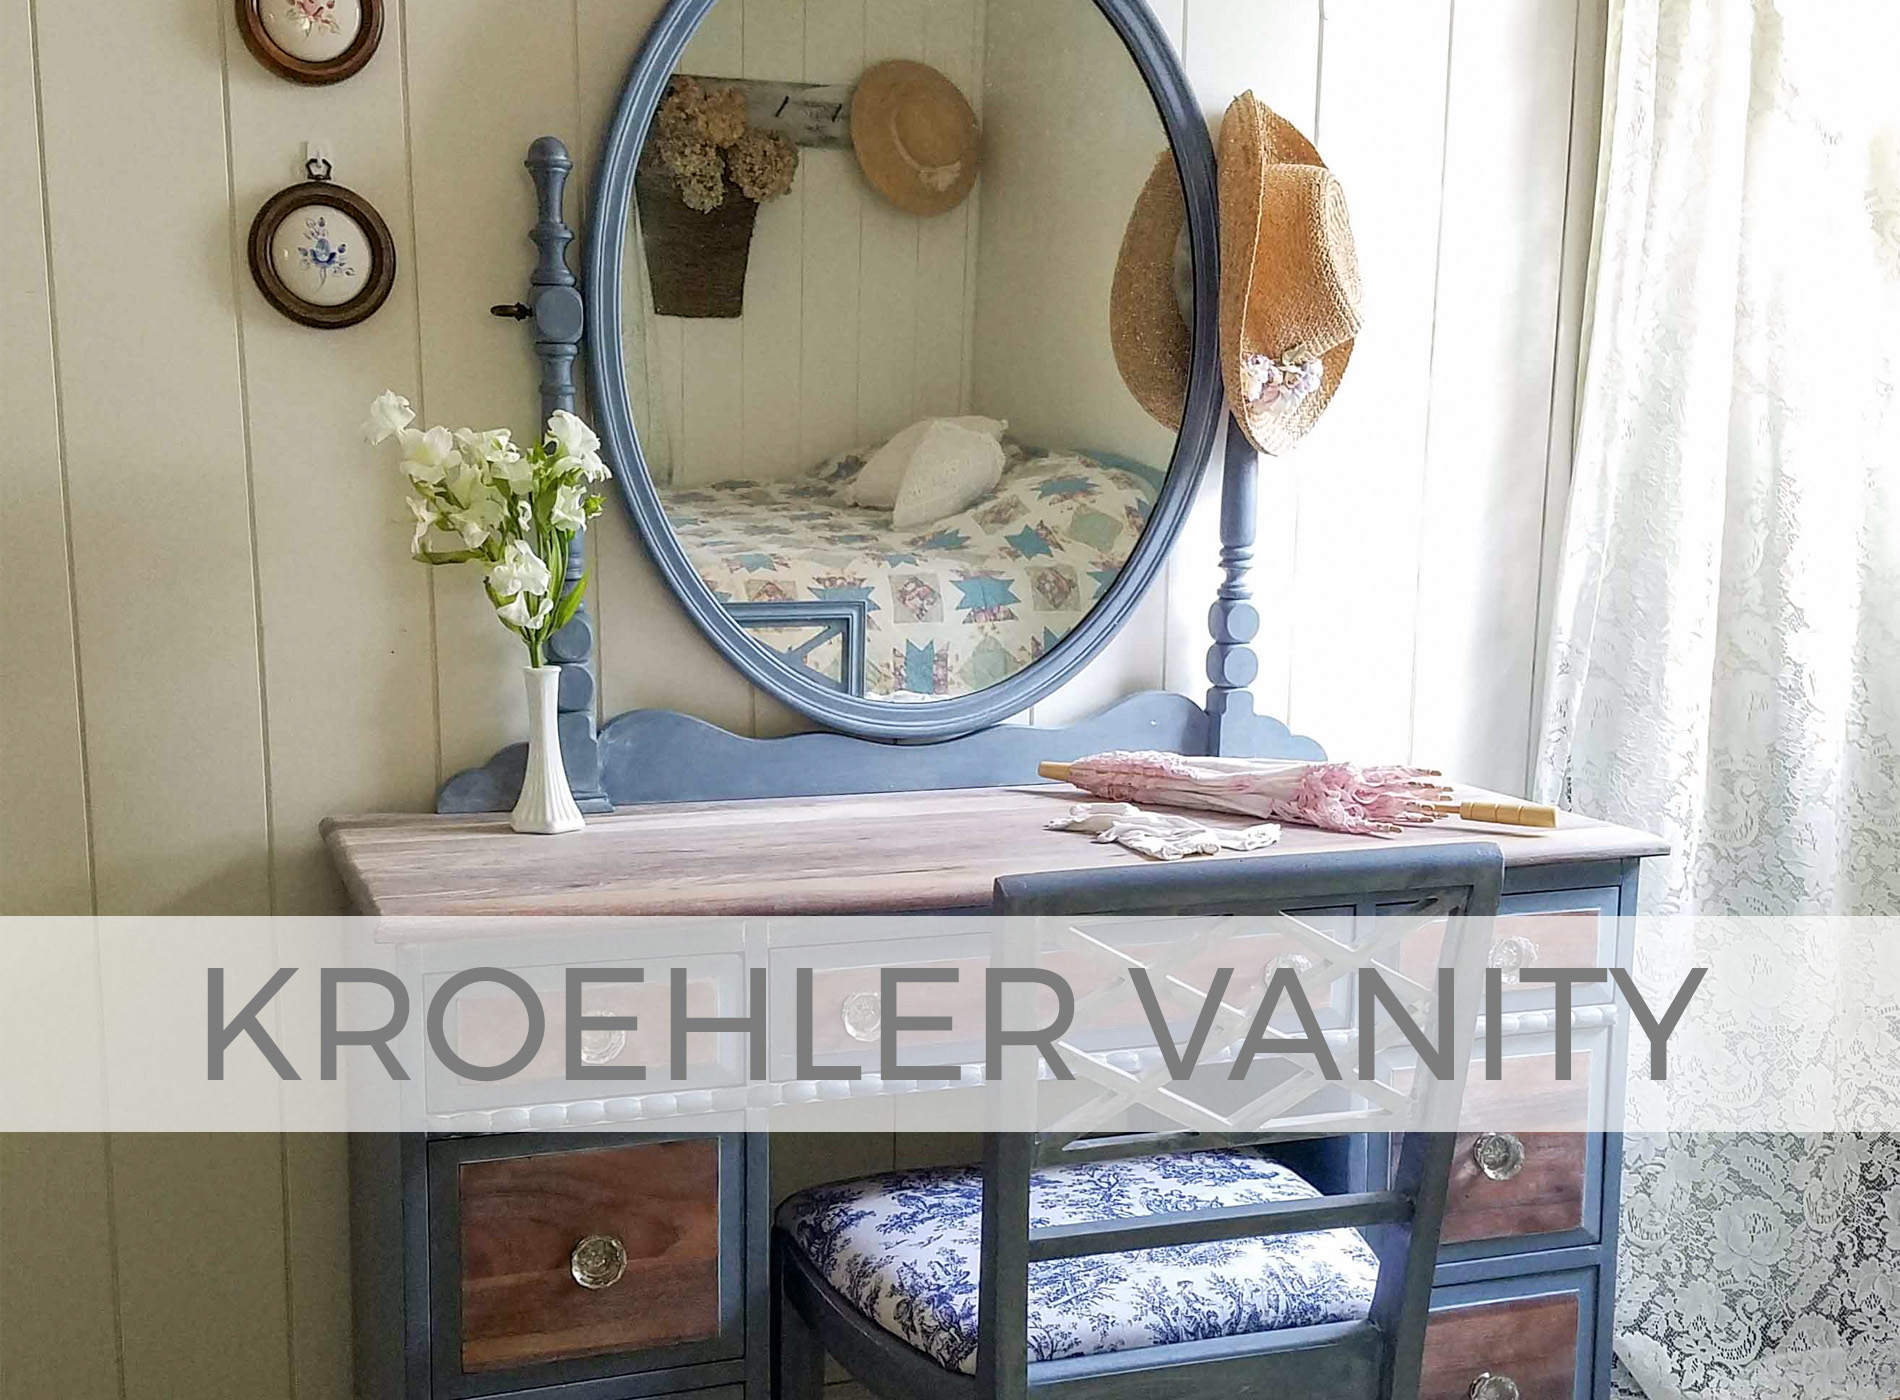 Antique Kroehler Vanity with Oval Mirror in Blue by Larissa of Prodigal Pieces | prodigalpieces.com #prodigalpieces #furniture #farmhouse #cottage #diy #home #homedecor